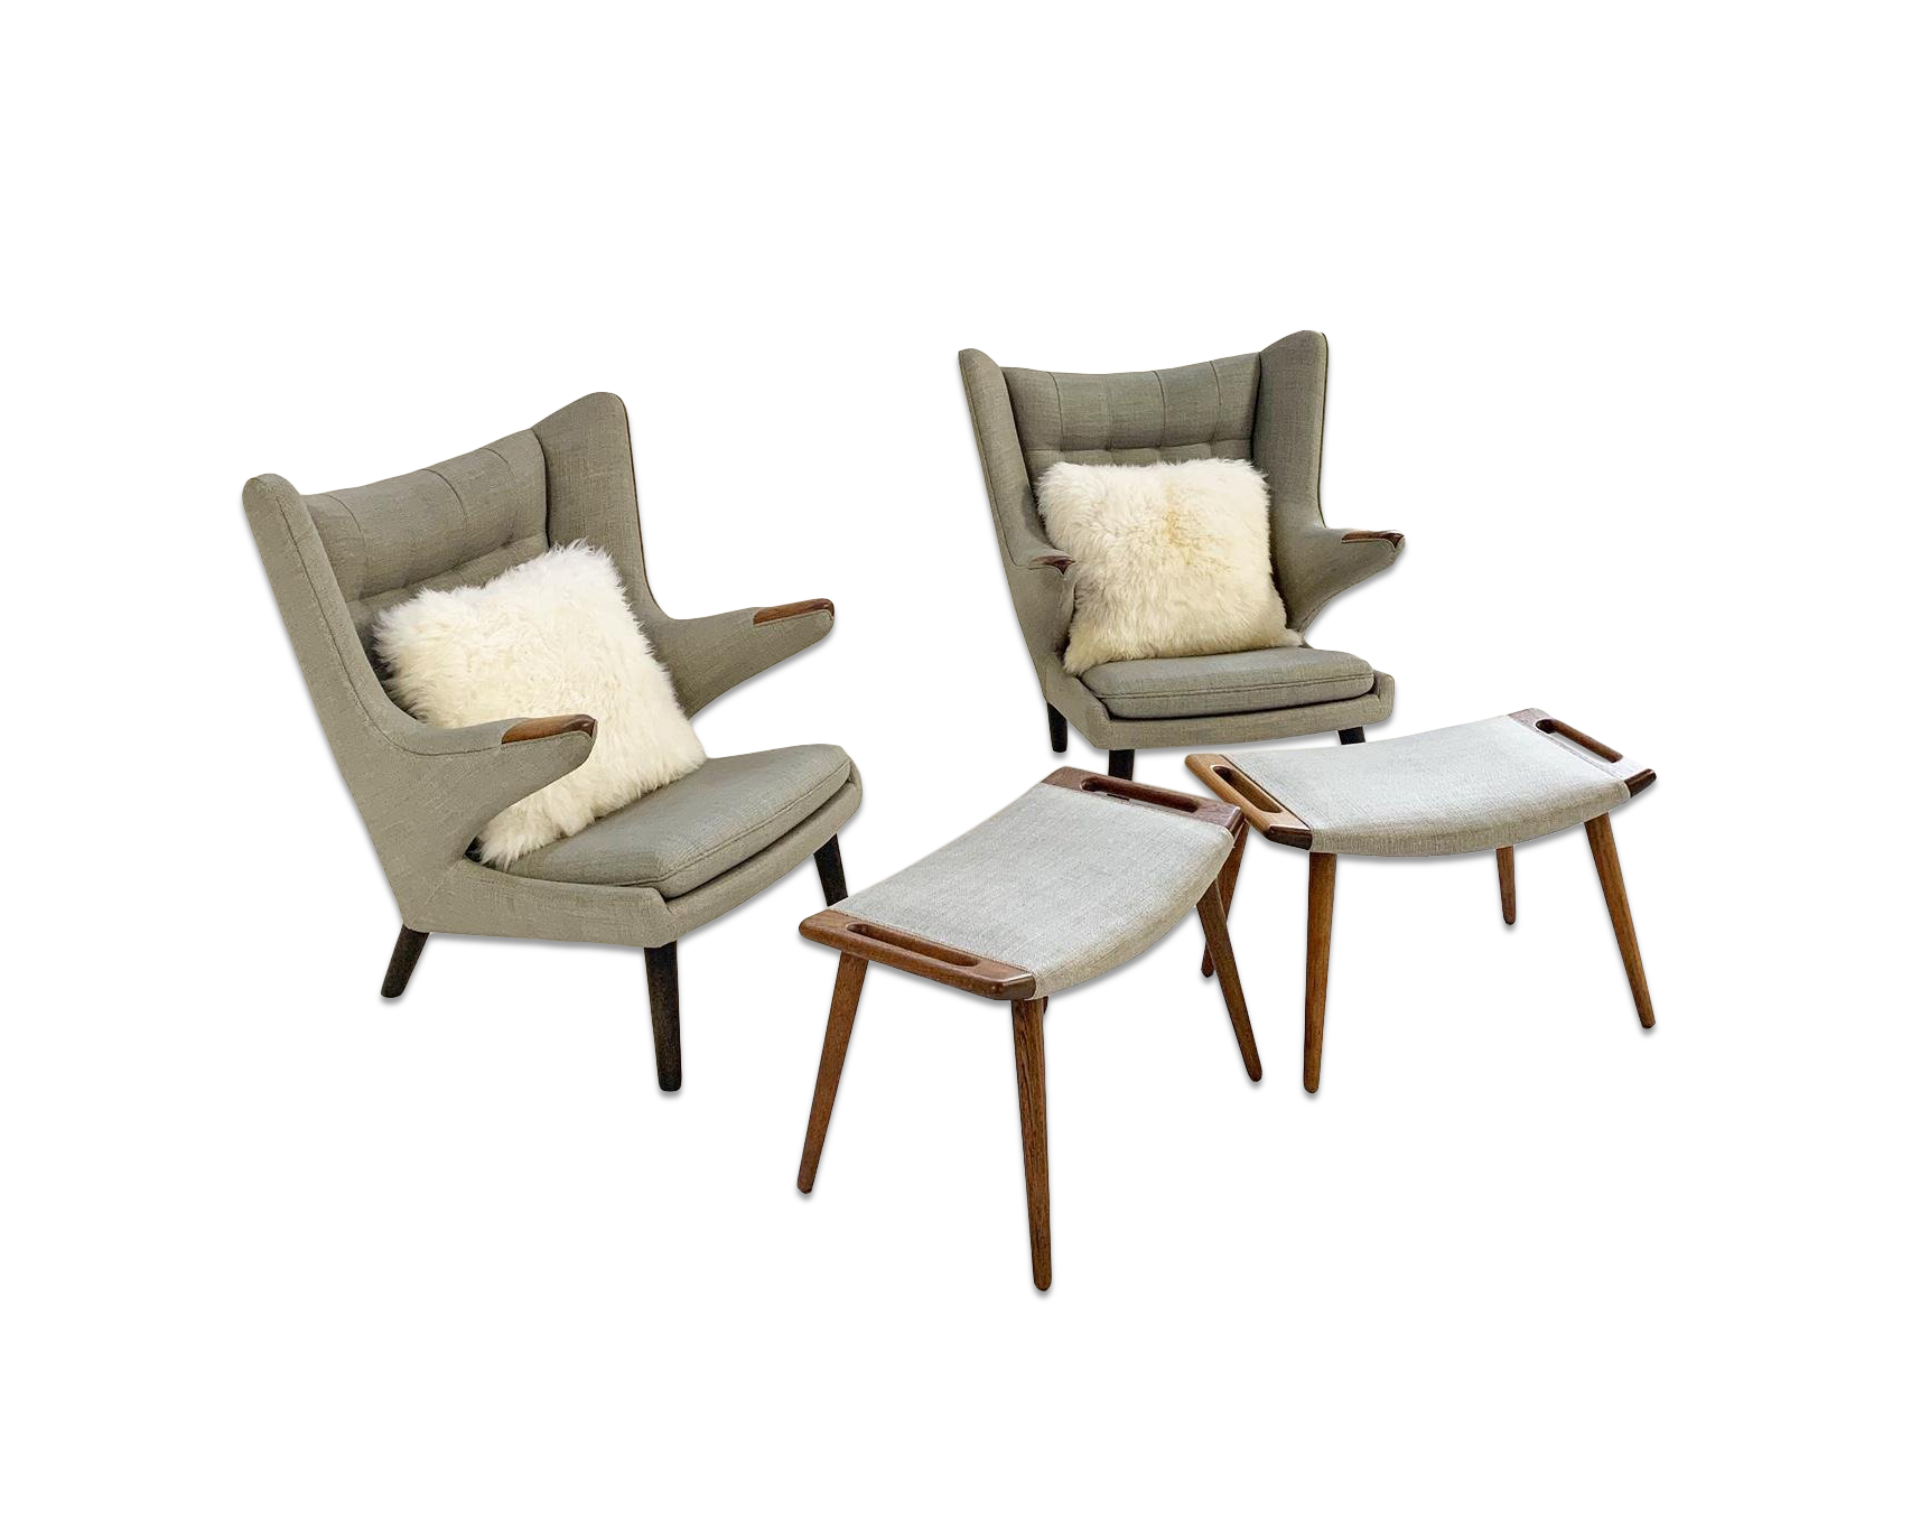 Papa Bear Chairs with Ottomans - FORSYTH